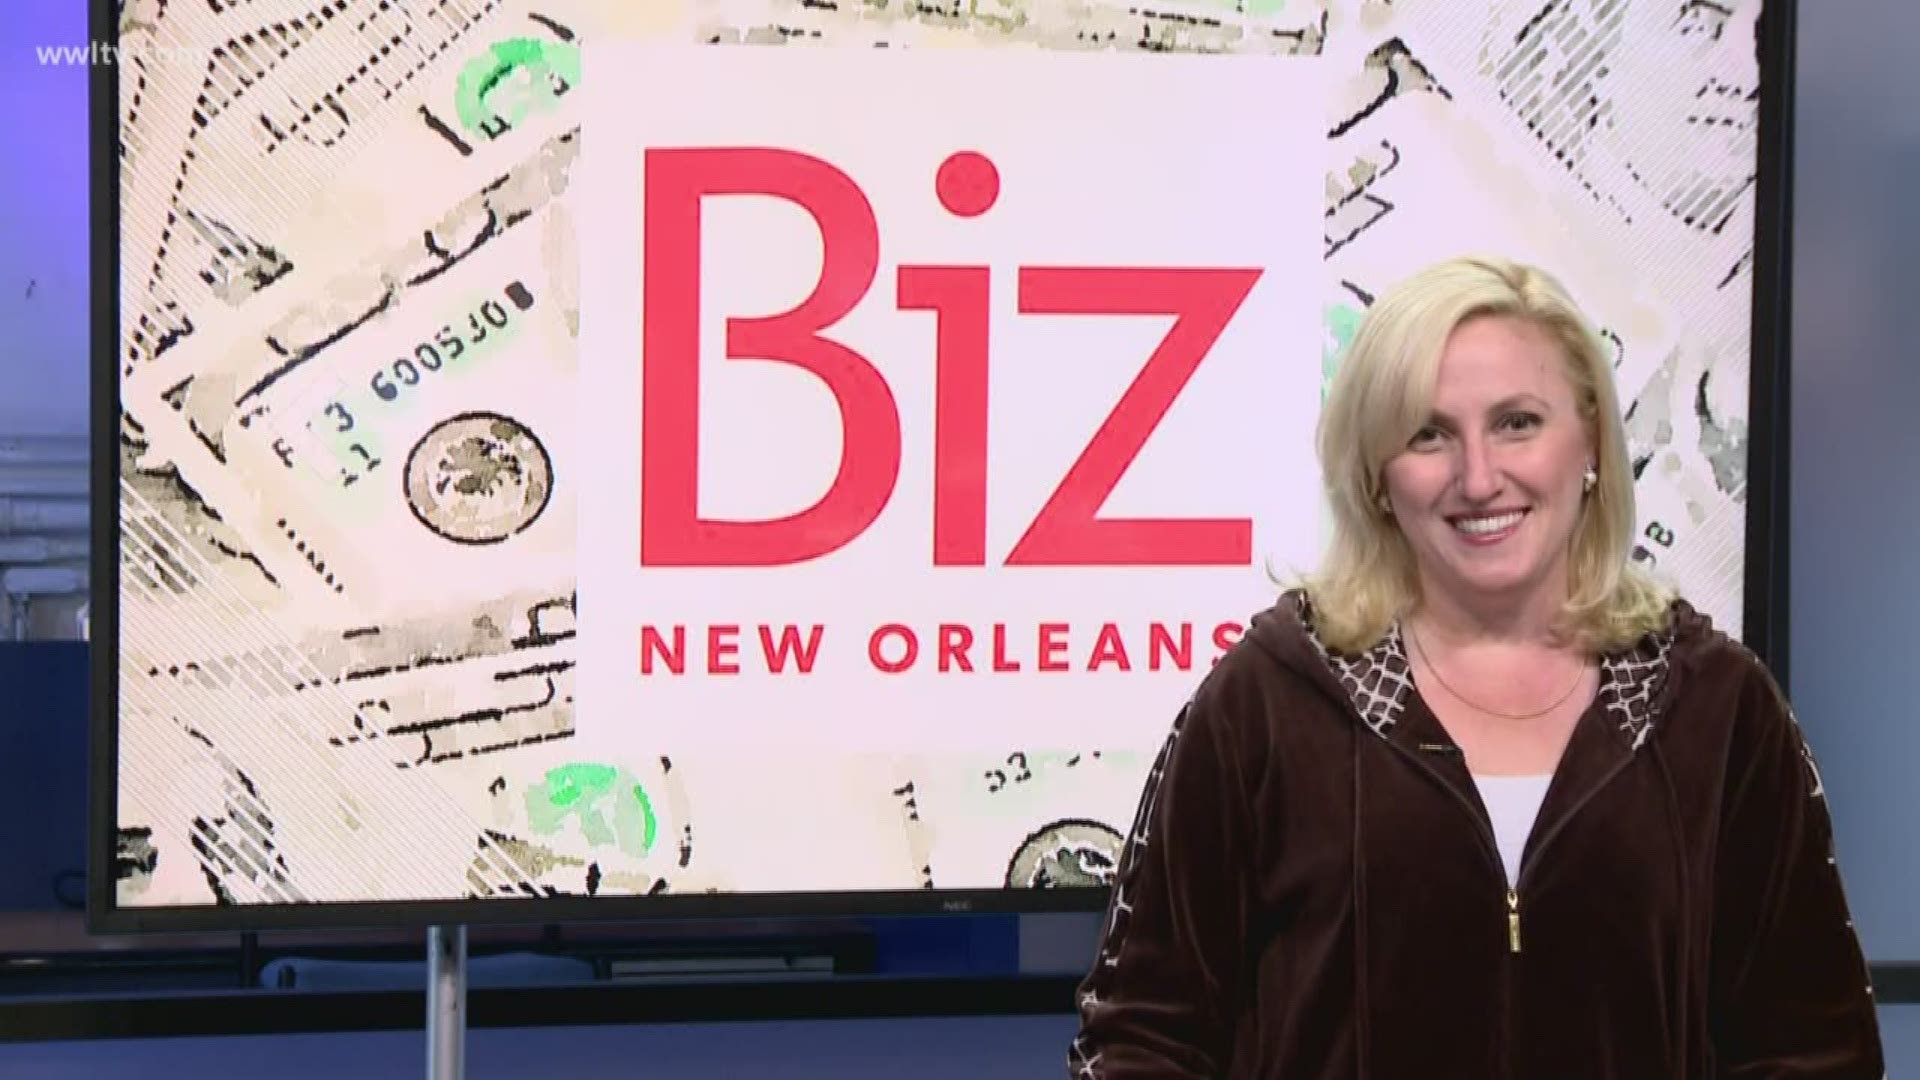 If you lose a lot of money, that can mean losing your house, your car and even your retirement nest egg. But can that loss also take years off your life? BizNewOrleans.com's Leslie Snadowsky has more about ‘wealth shock’ and what toll it takes on your health.